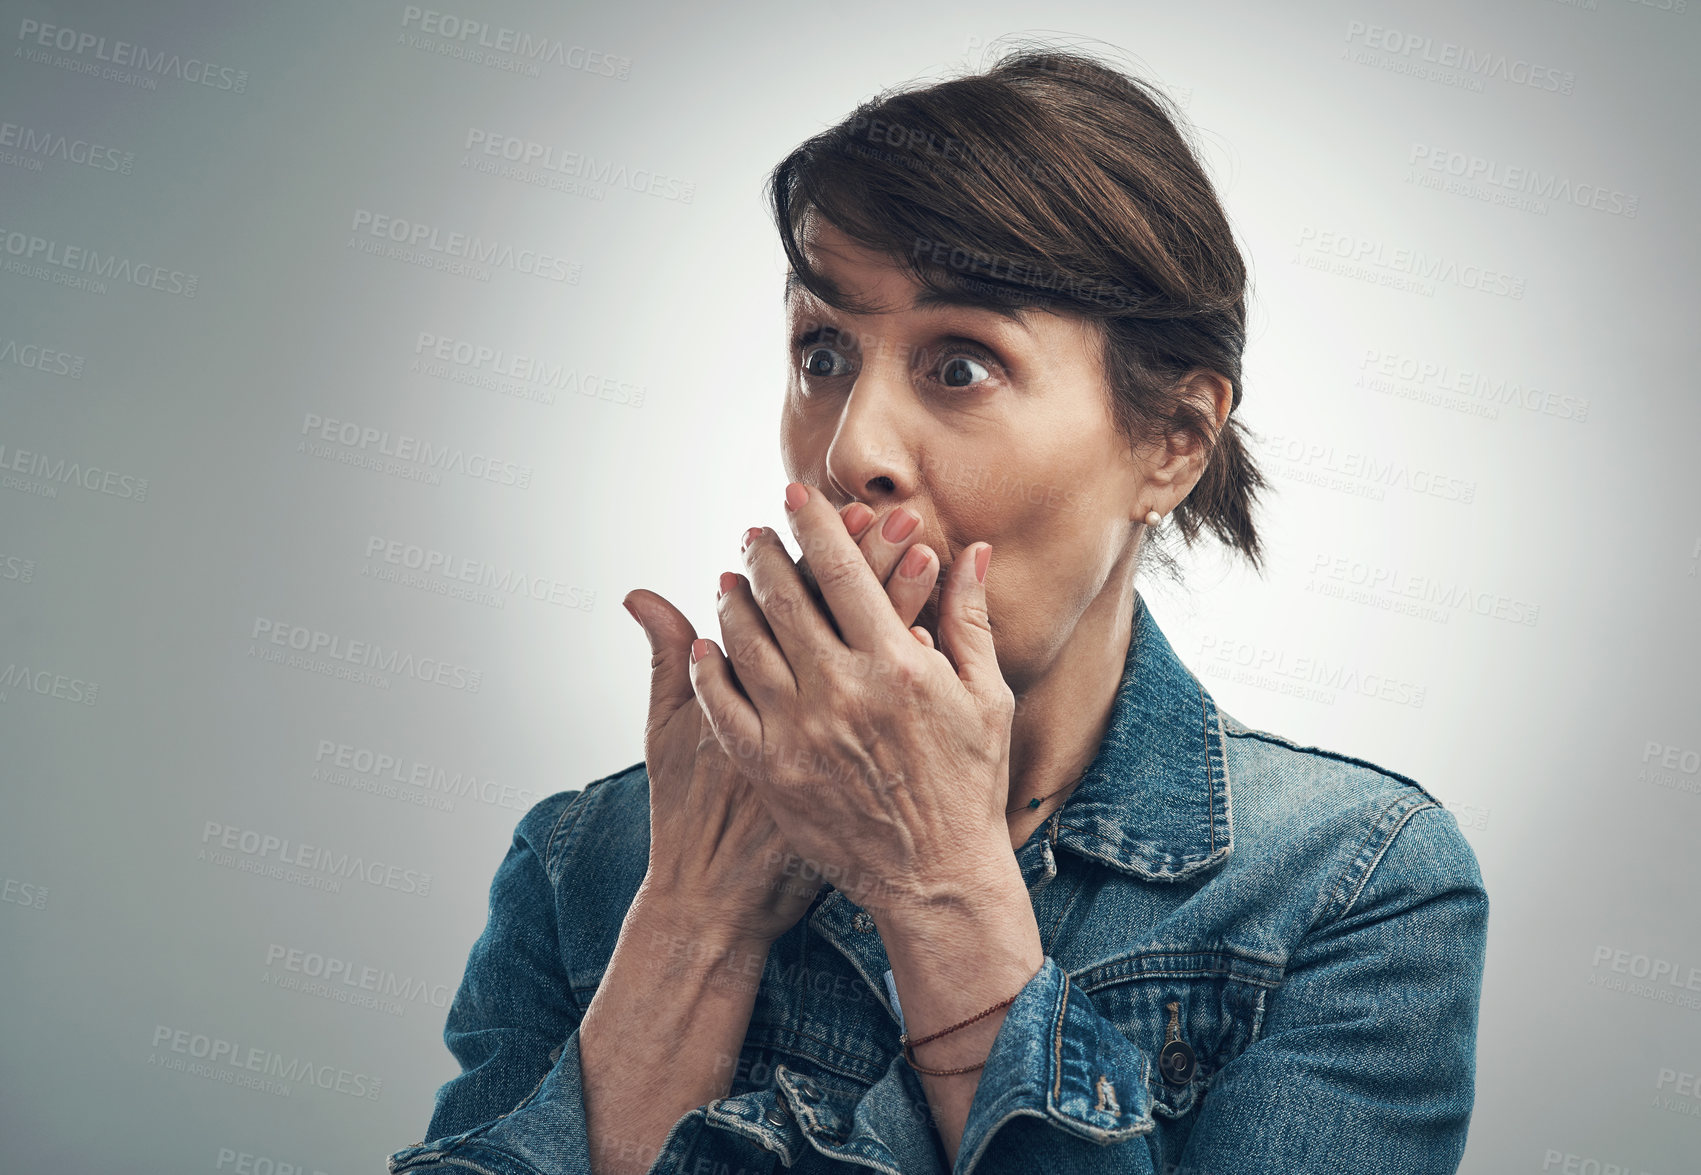 Buy stock photo Studio shot of a senior woman covering her mouth and looking shocked against a grey background